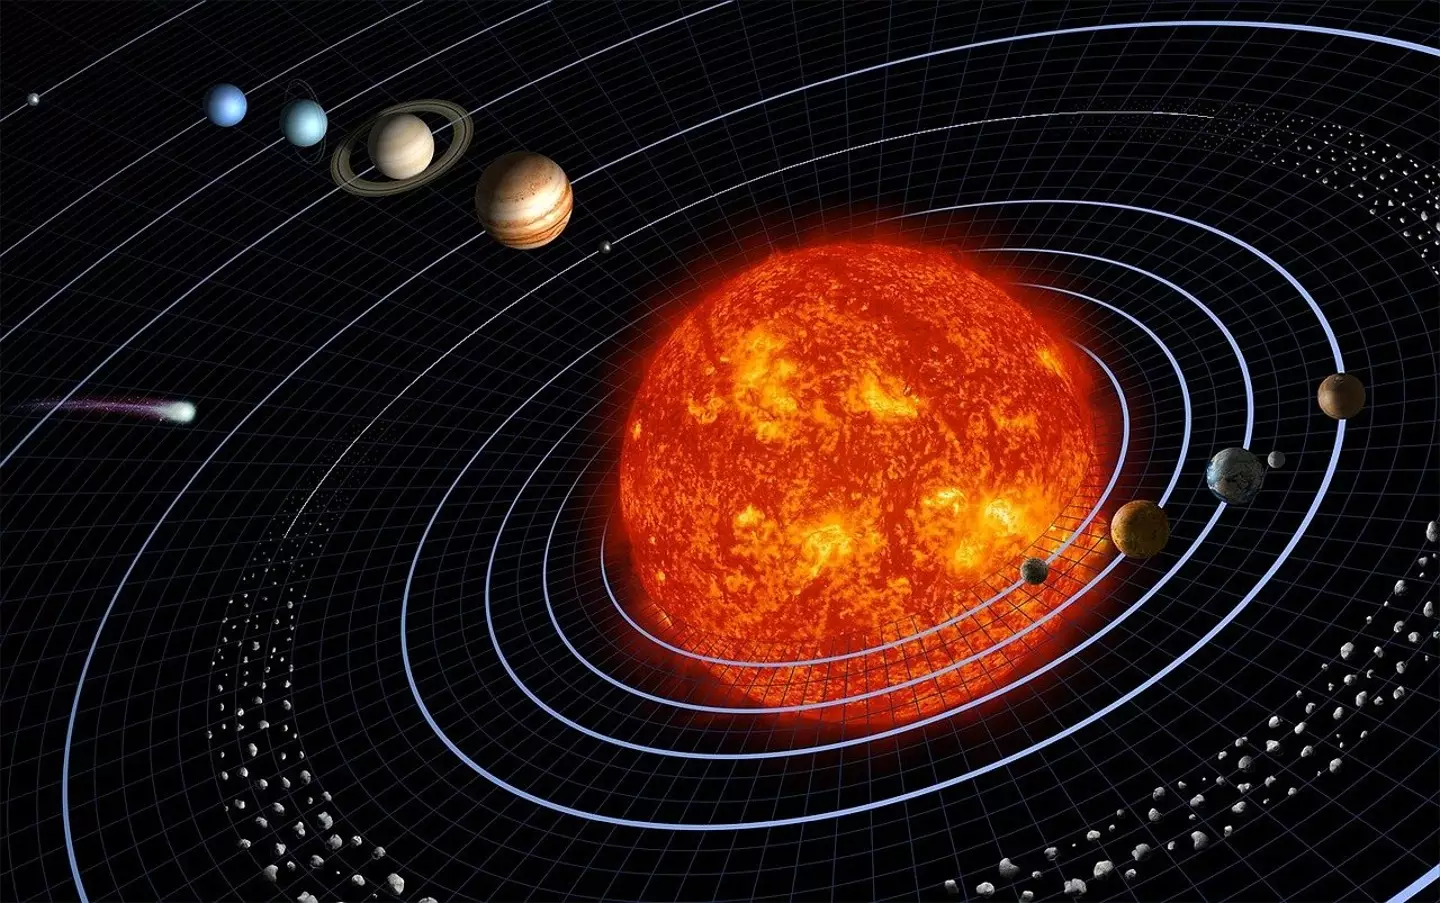 A counter Earth could be present in other Solar Systems.